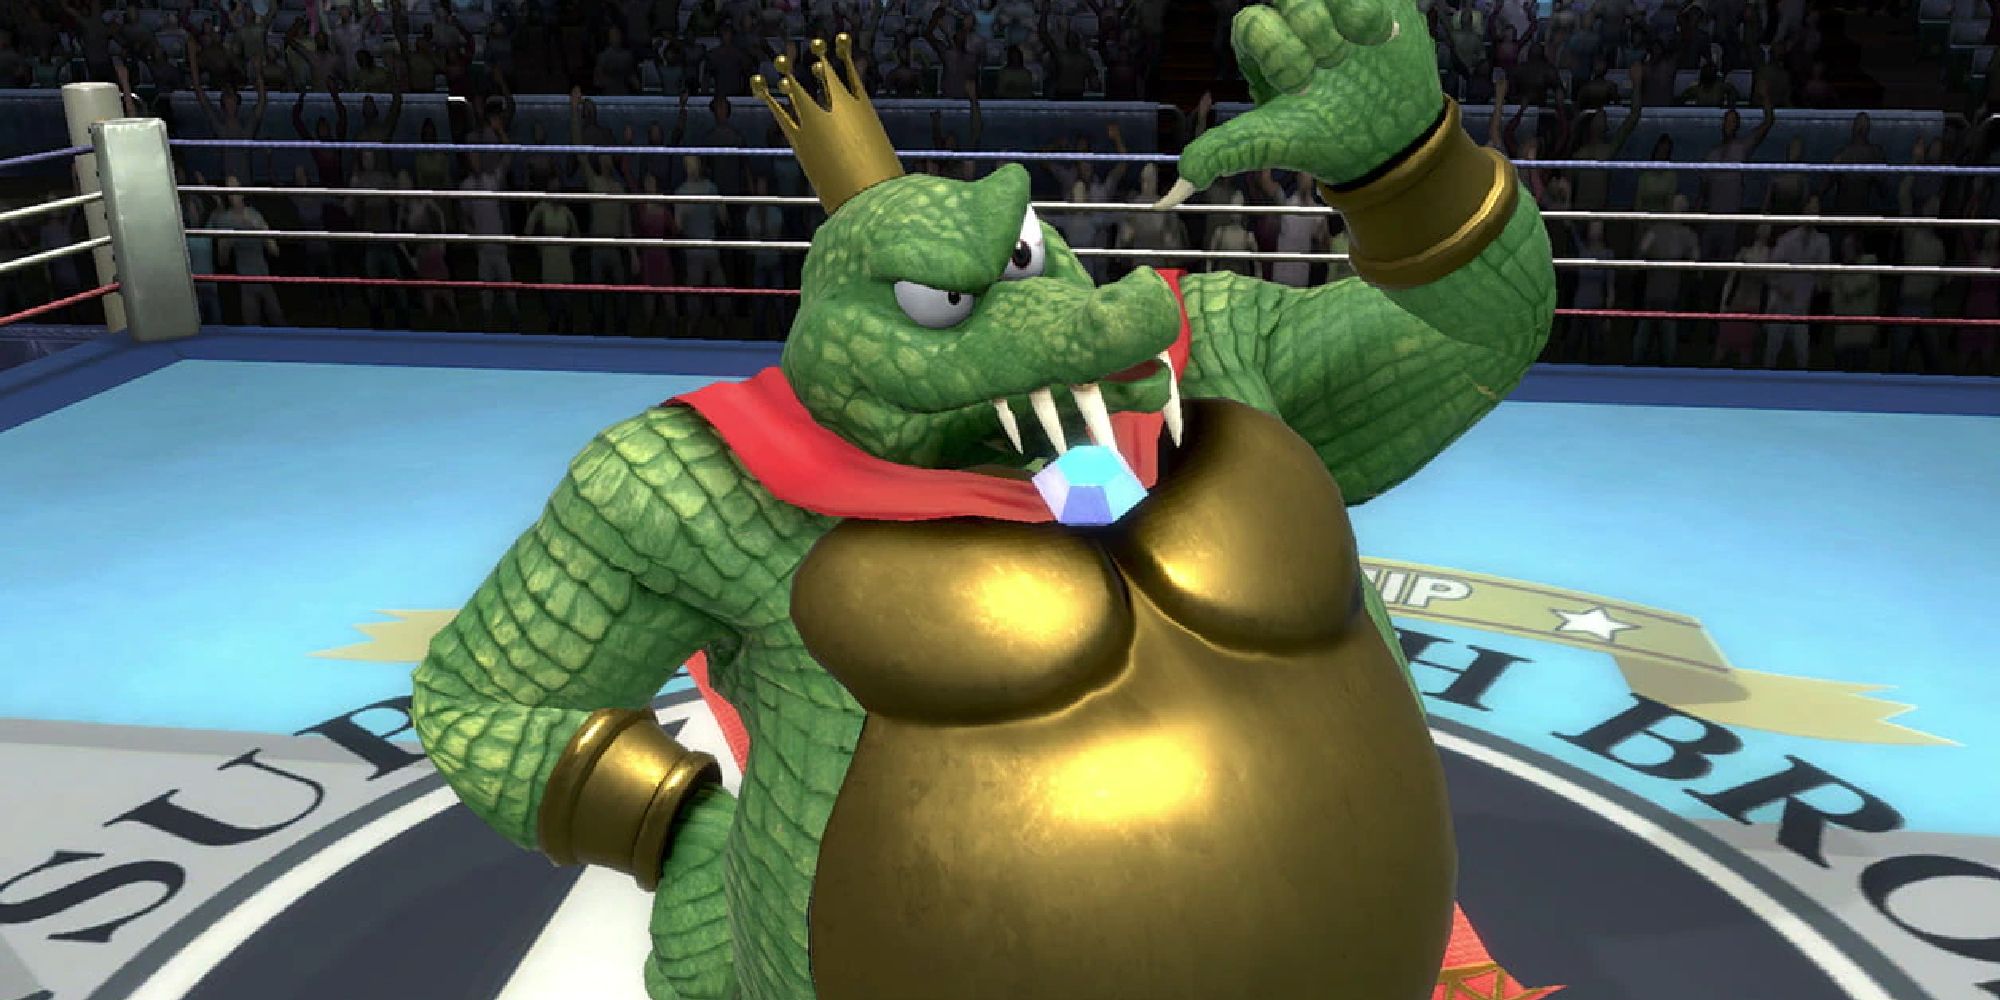 King K. Rool pointing at himself in a wrestling ring